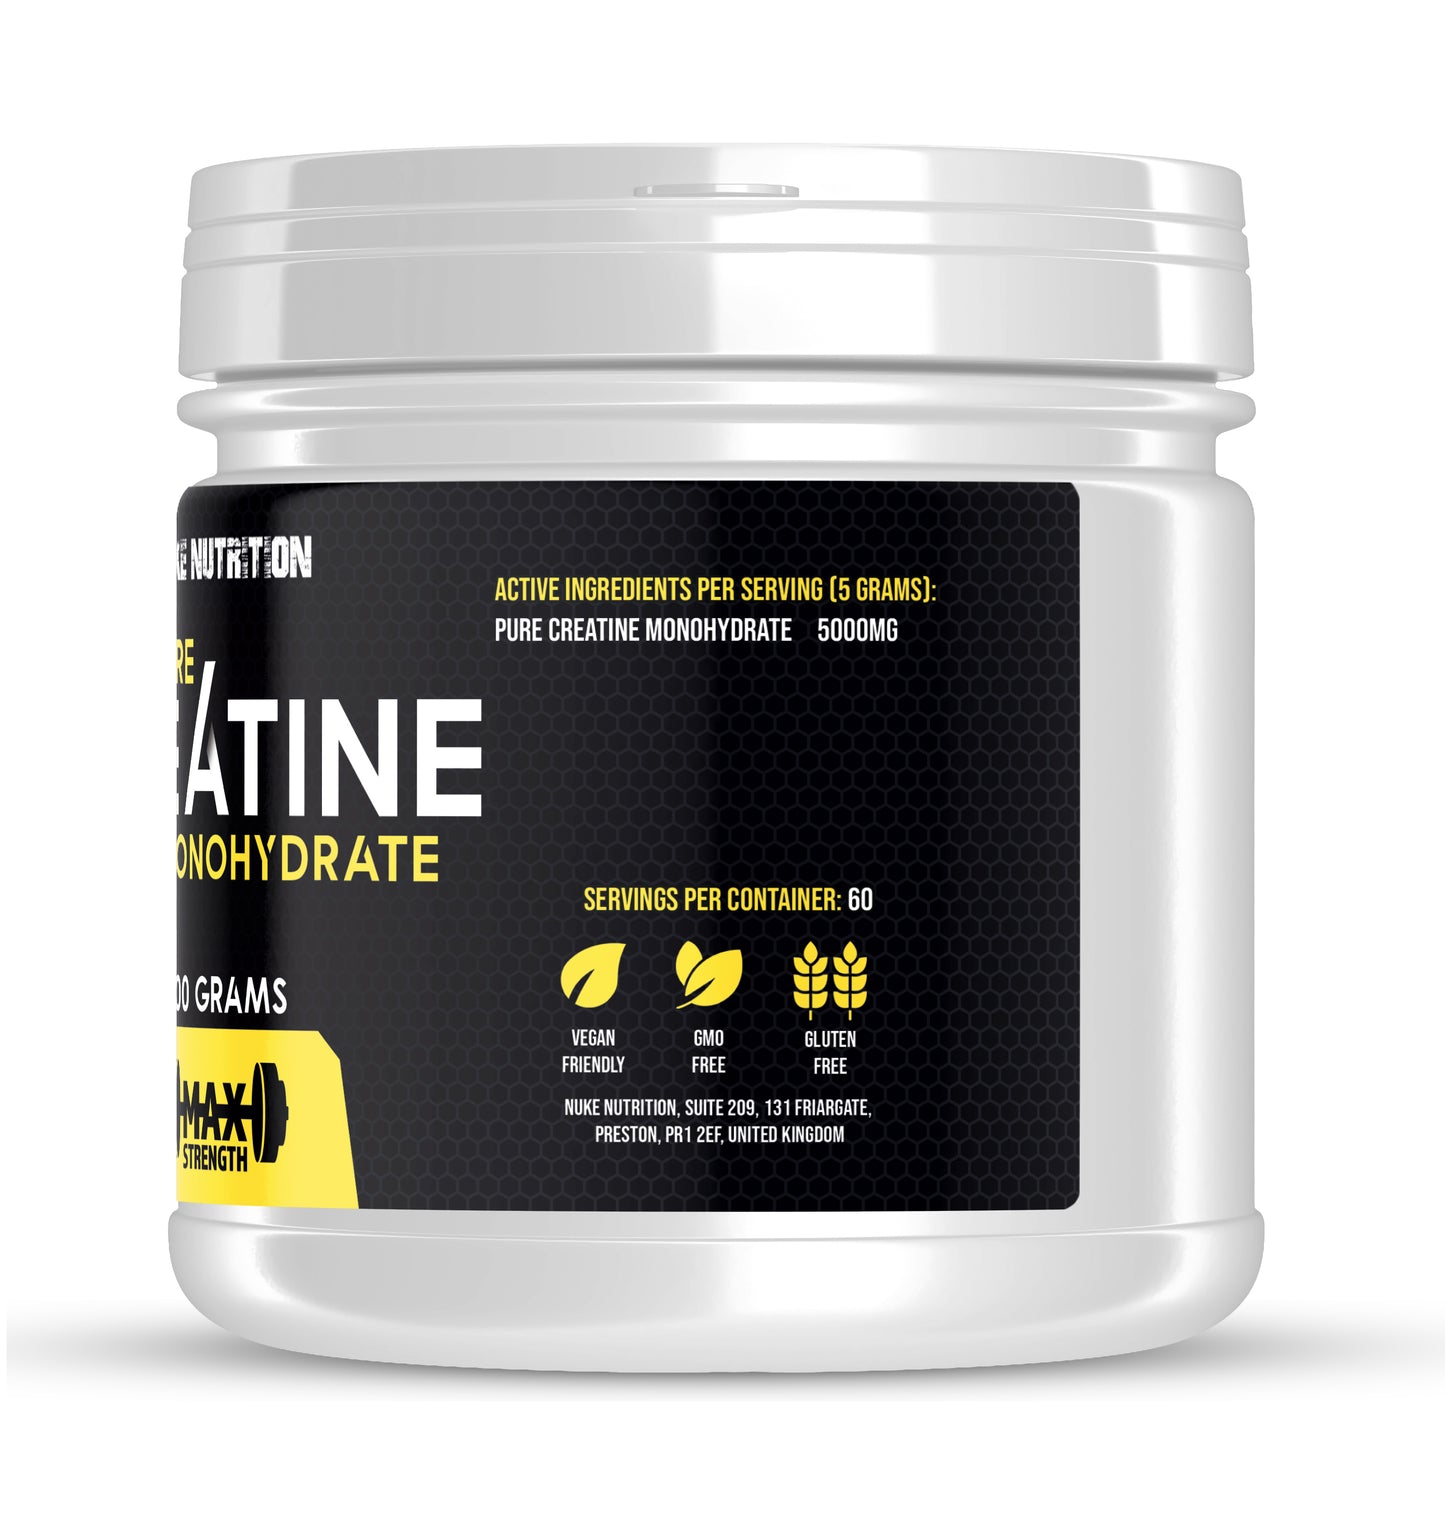 Creatine Monohydrate Powder 300g High Strength & Micronised for Maximum Absorbency Muscle Growth & Strength